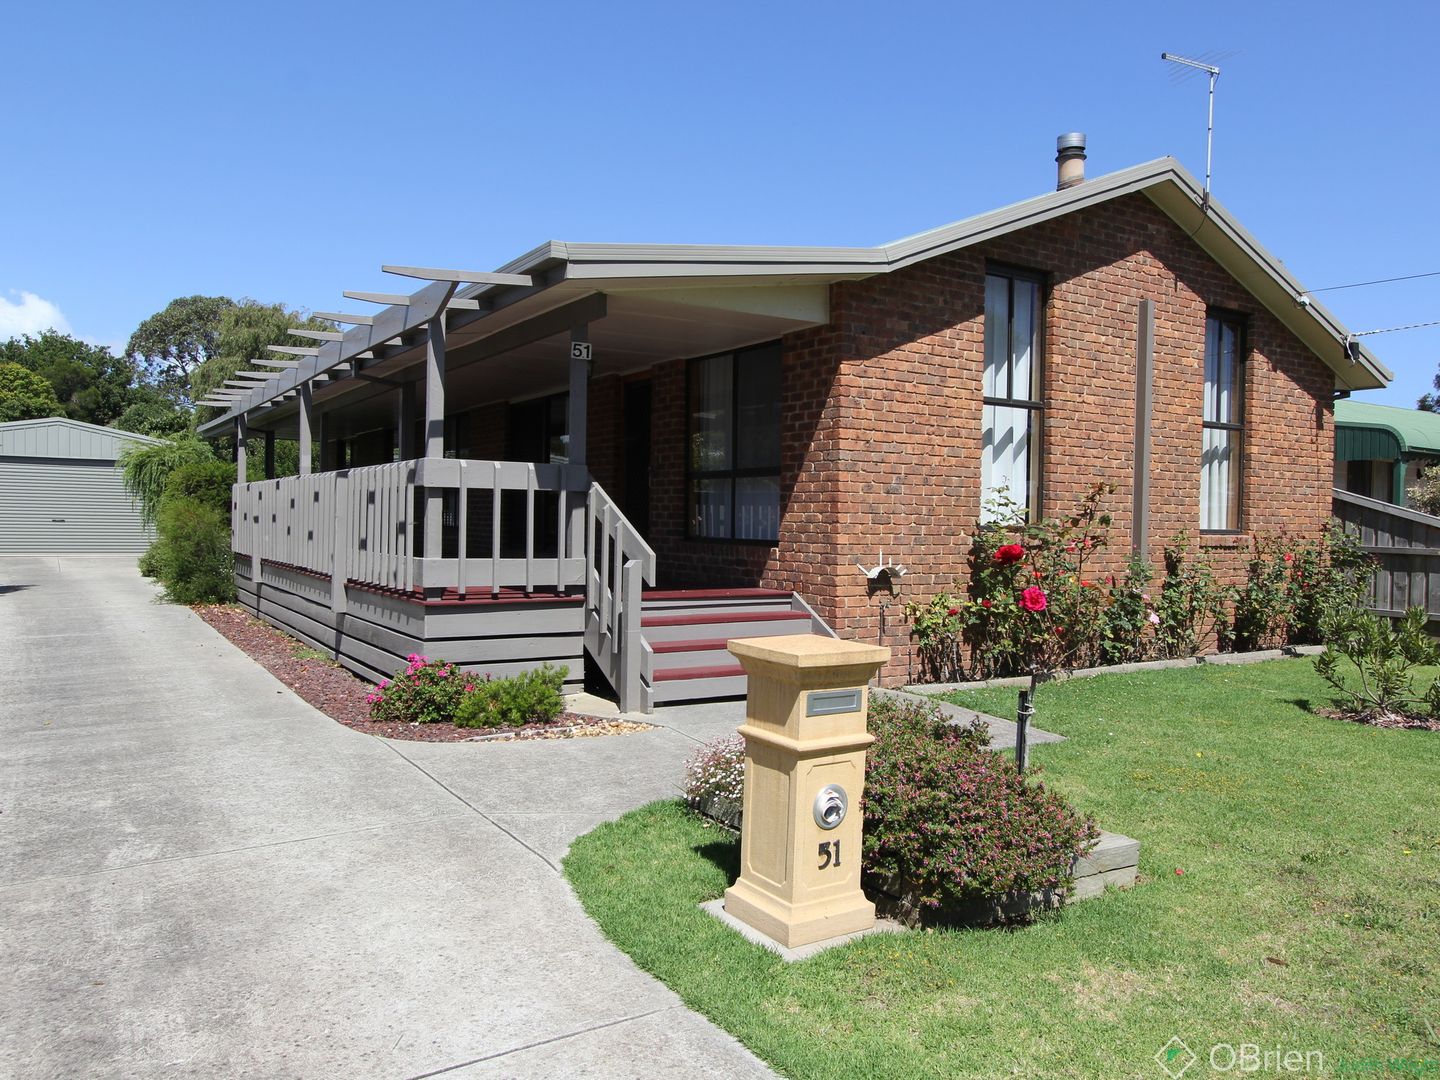 51 Mchaffie Drive, Cowes VIC 3922